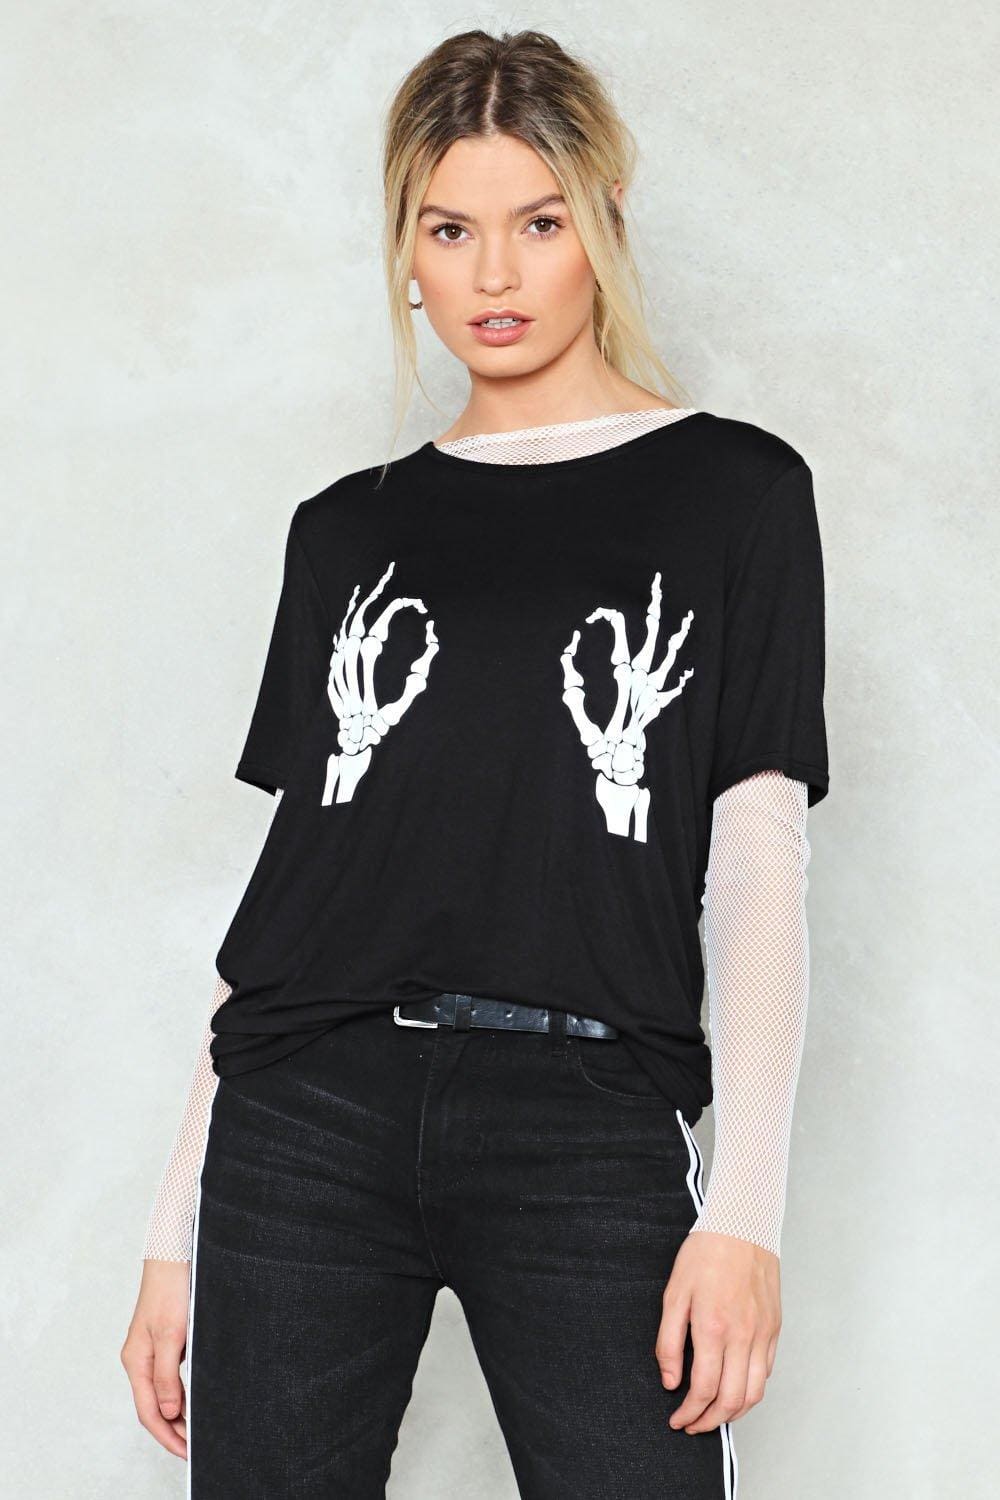 Skeleton hands tee in black and white